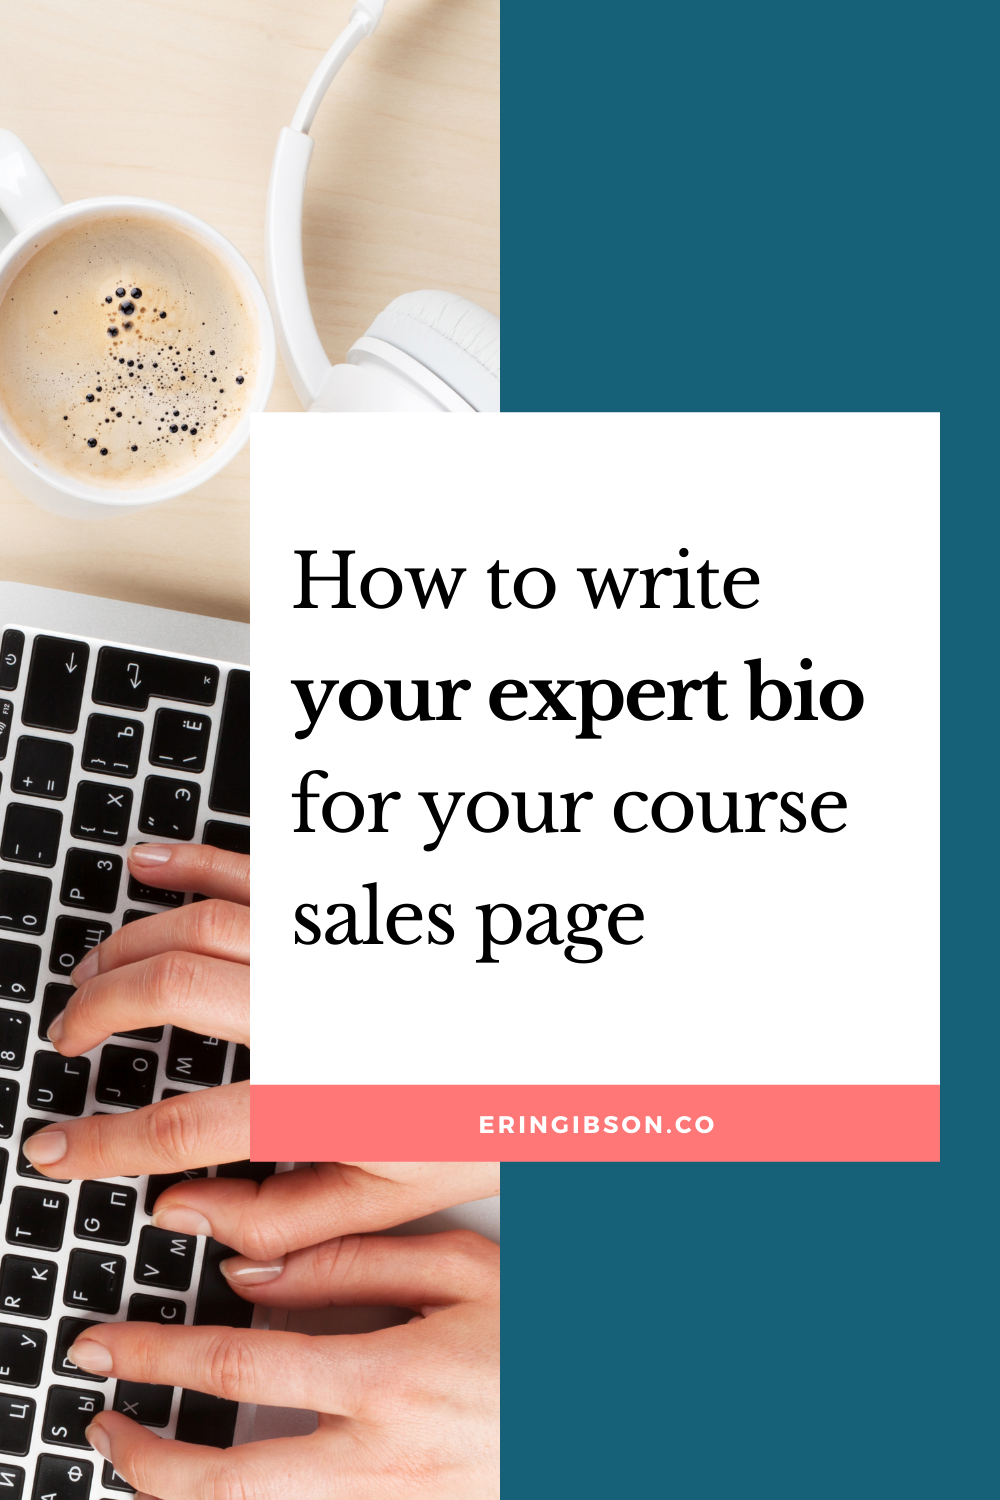 How to write your expert bio for your course sales page